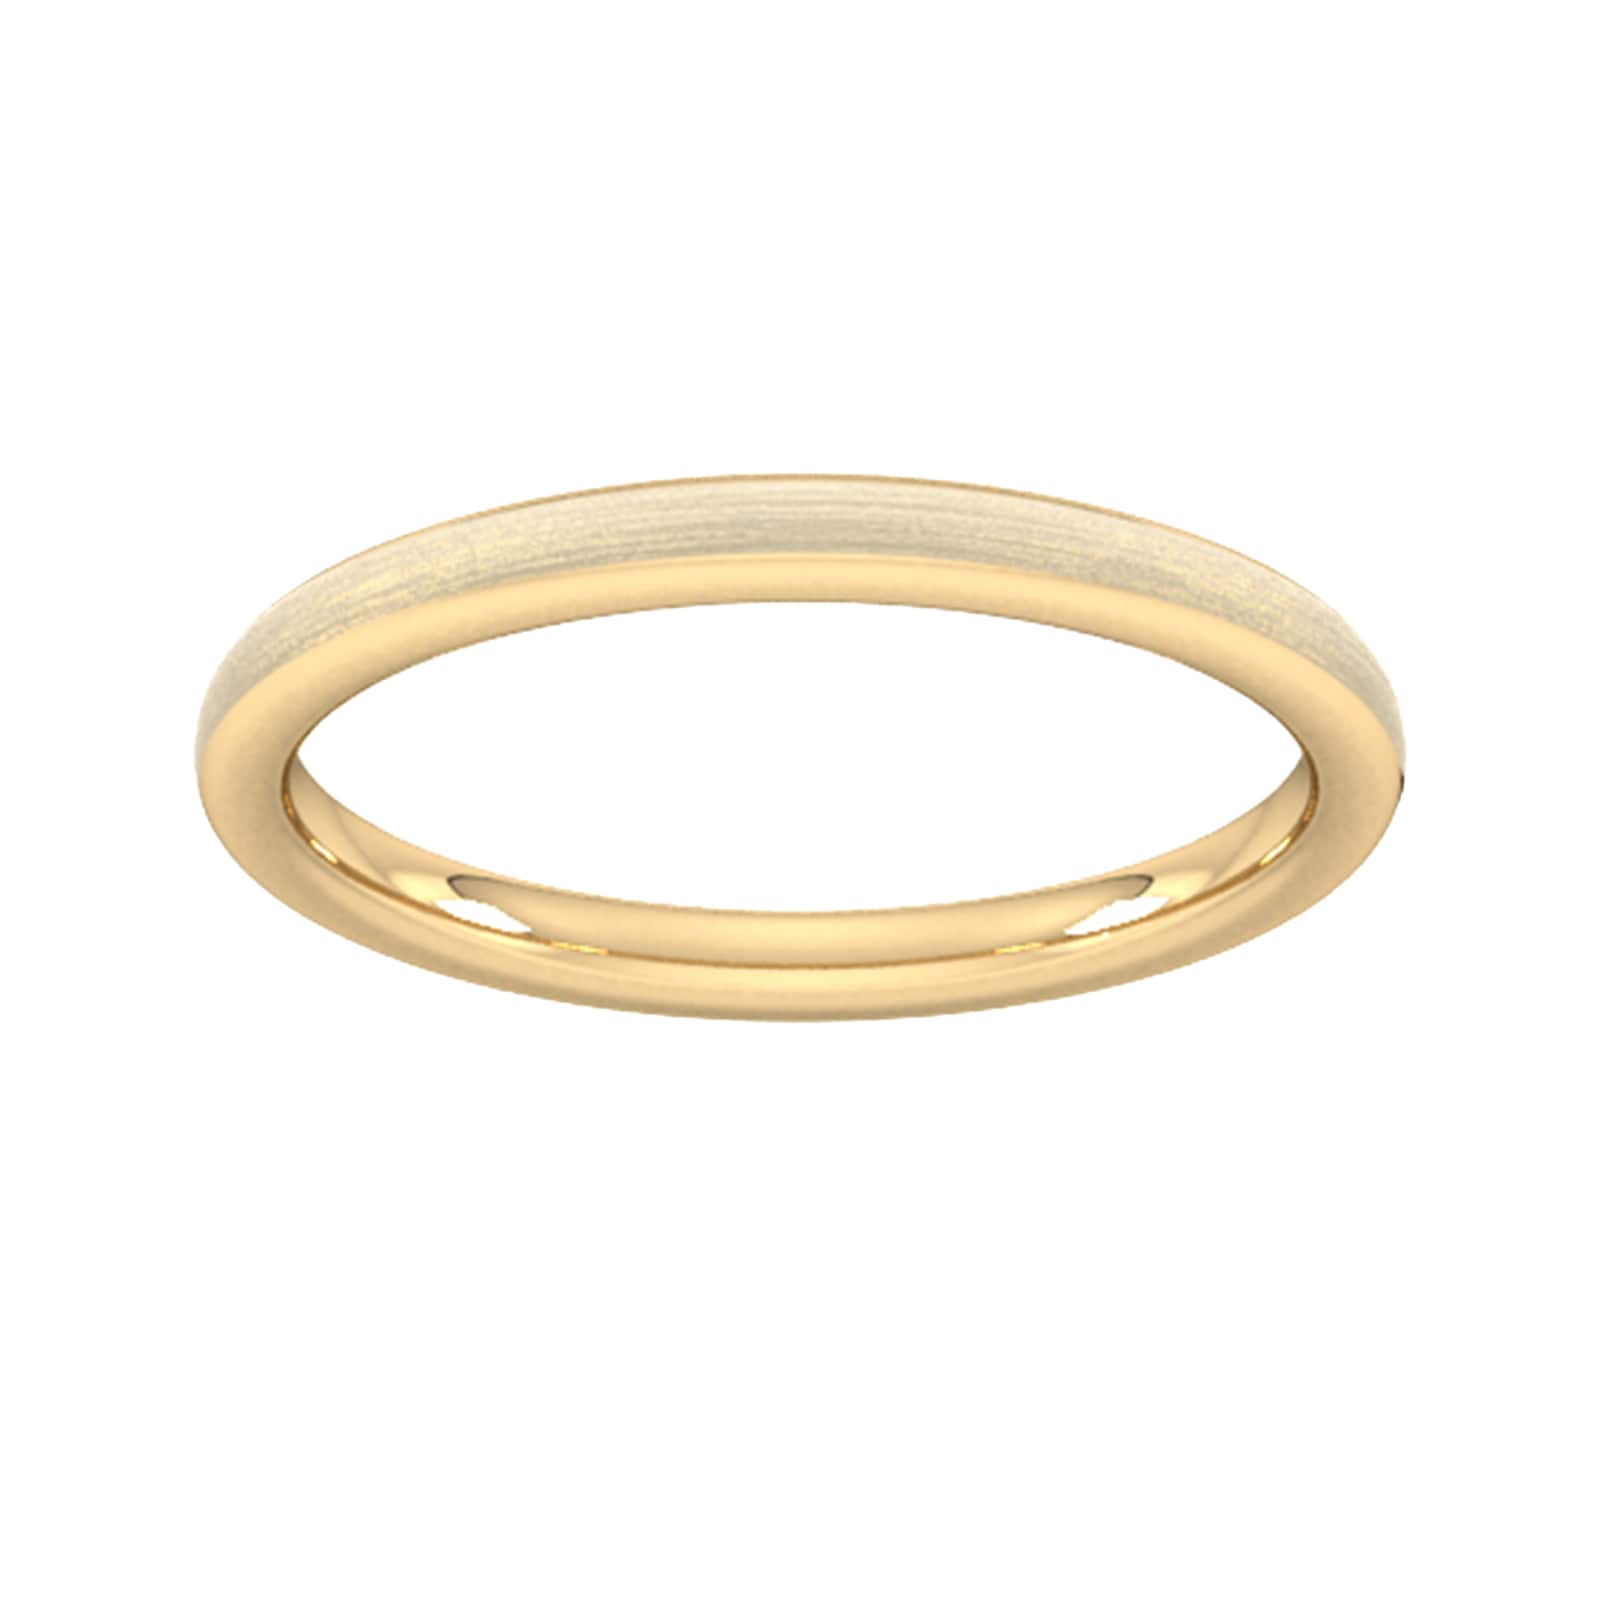 2mm D Shape Standard Matt Finished Wedding Ring In 18 Carat Yellow Gold - Ring Size R